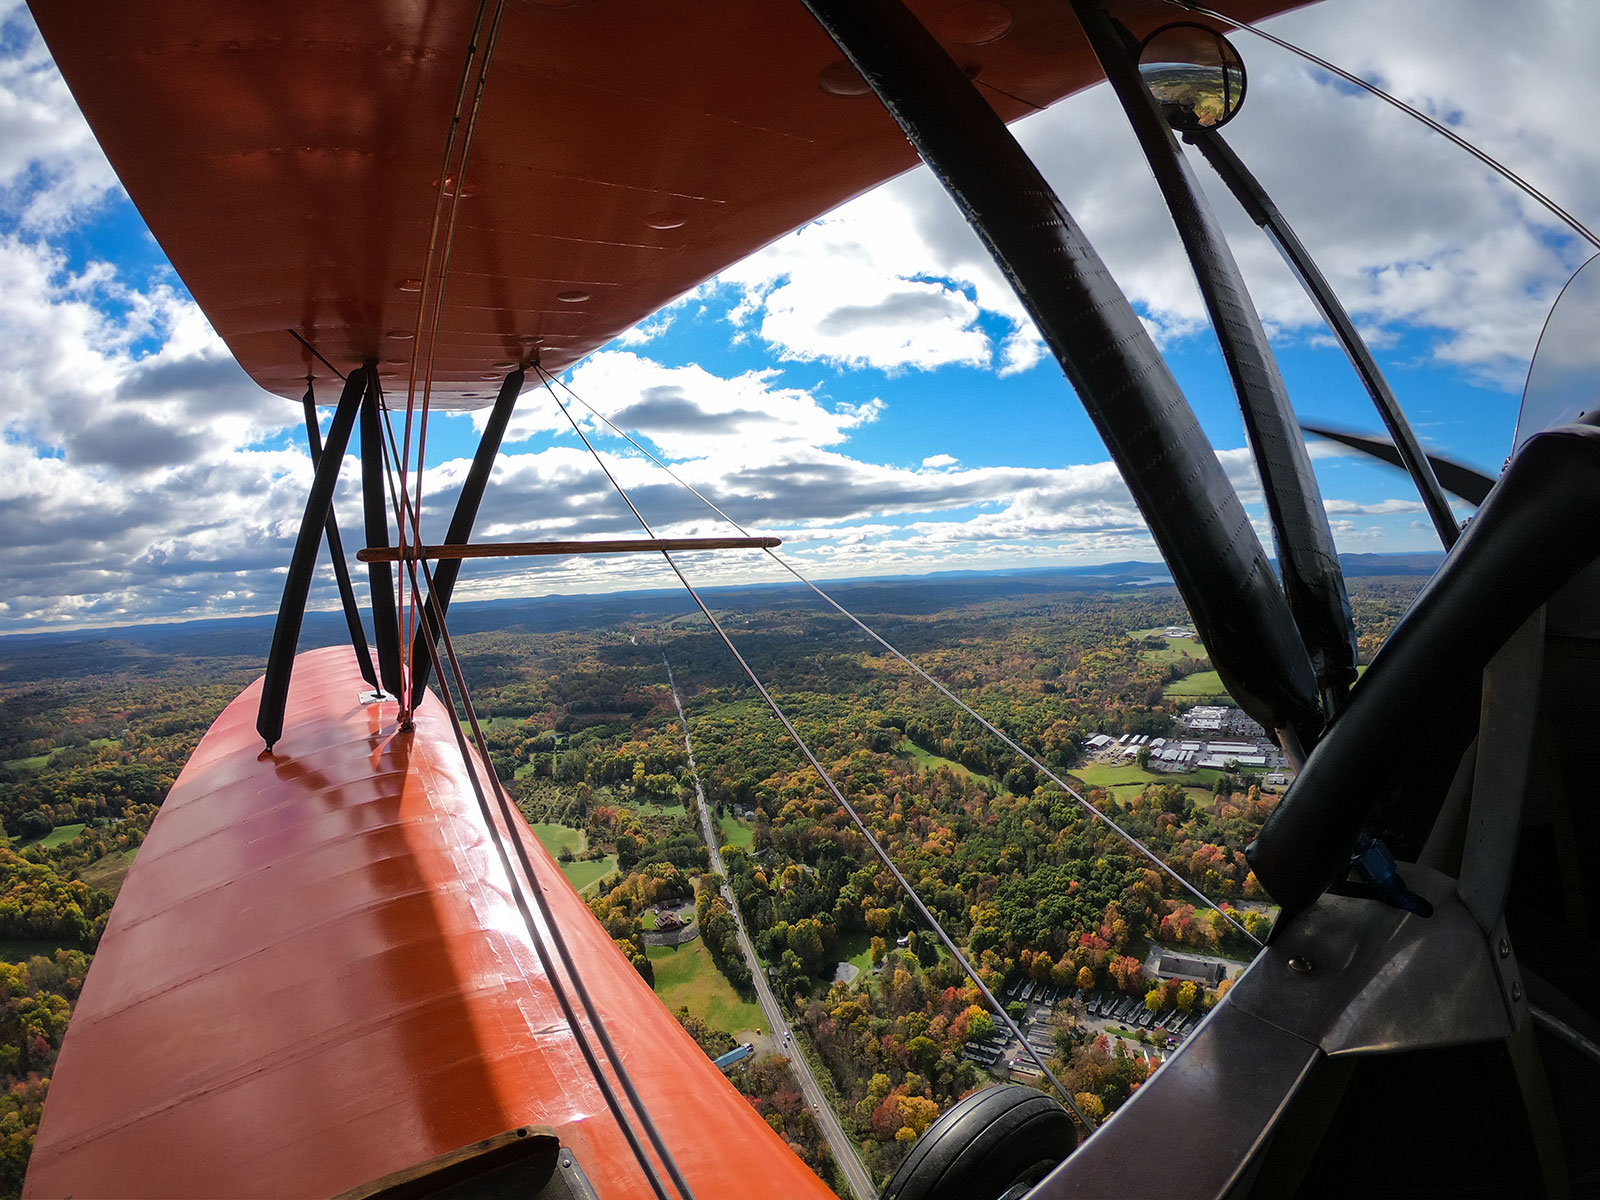 Flying in the 1929 Standard D-25 -- one of the Old Rhinebeck Aerodrome's biplanes